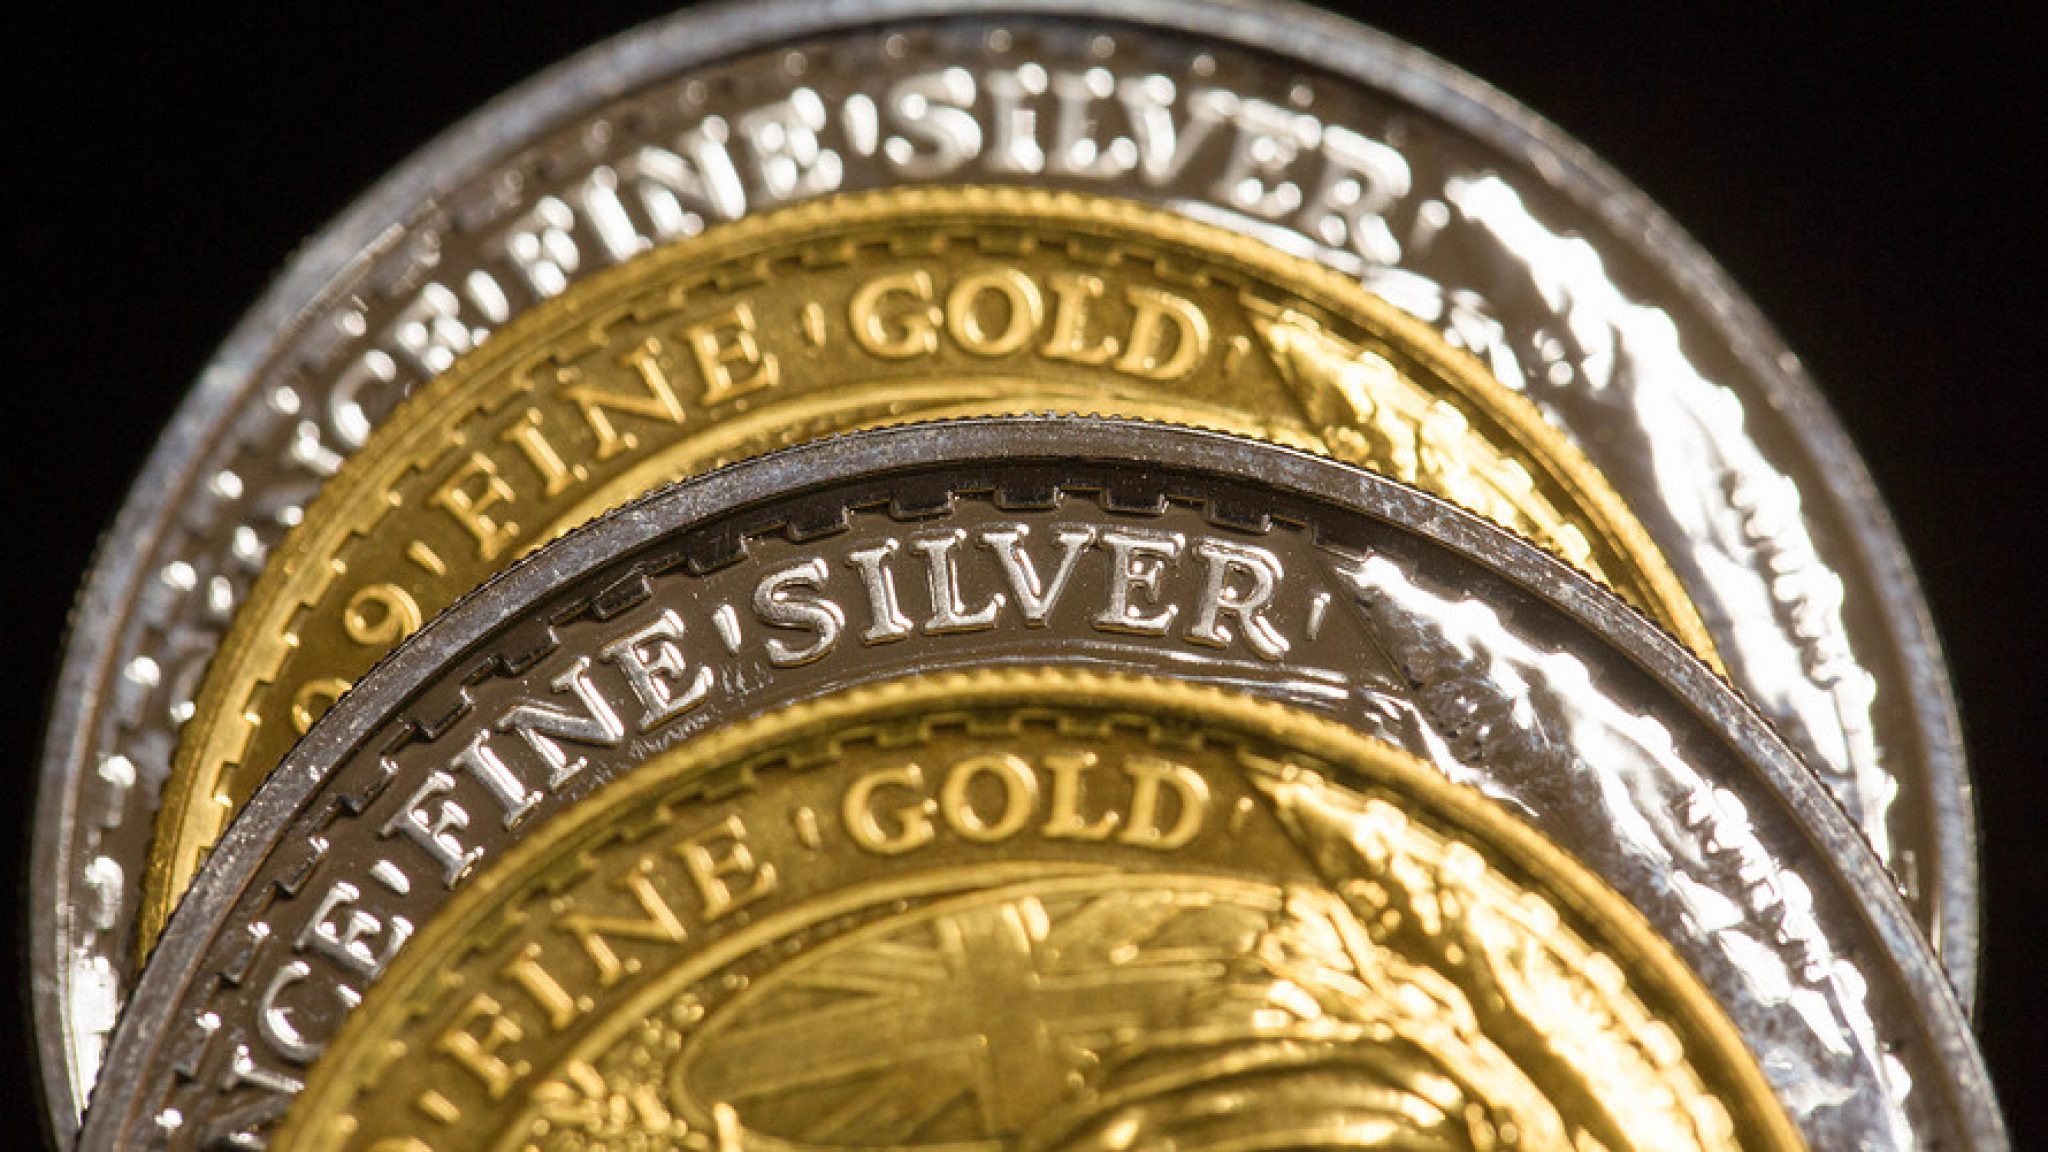 Gold vs. Silver as Precious Metal Investments